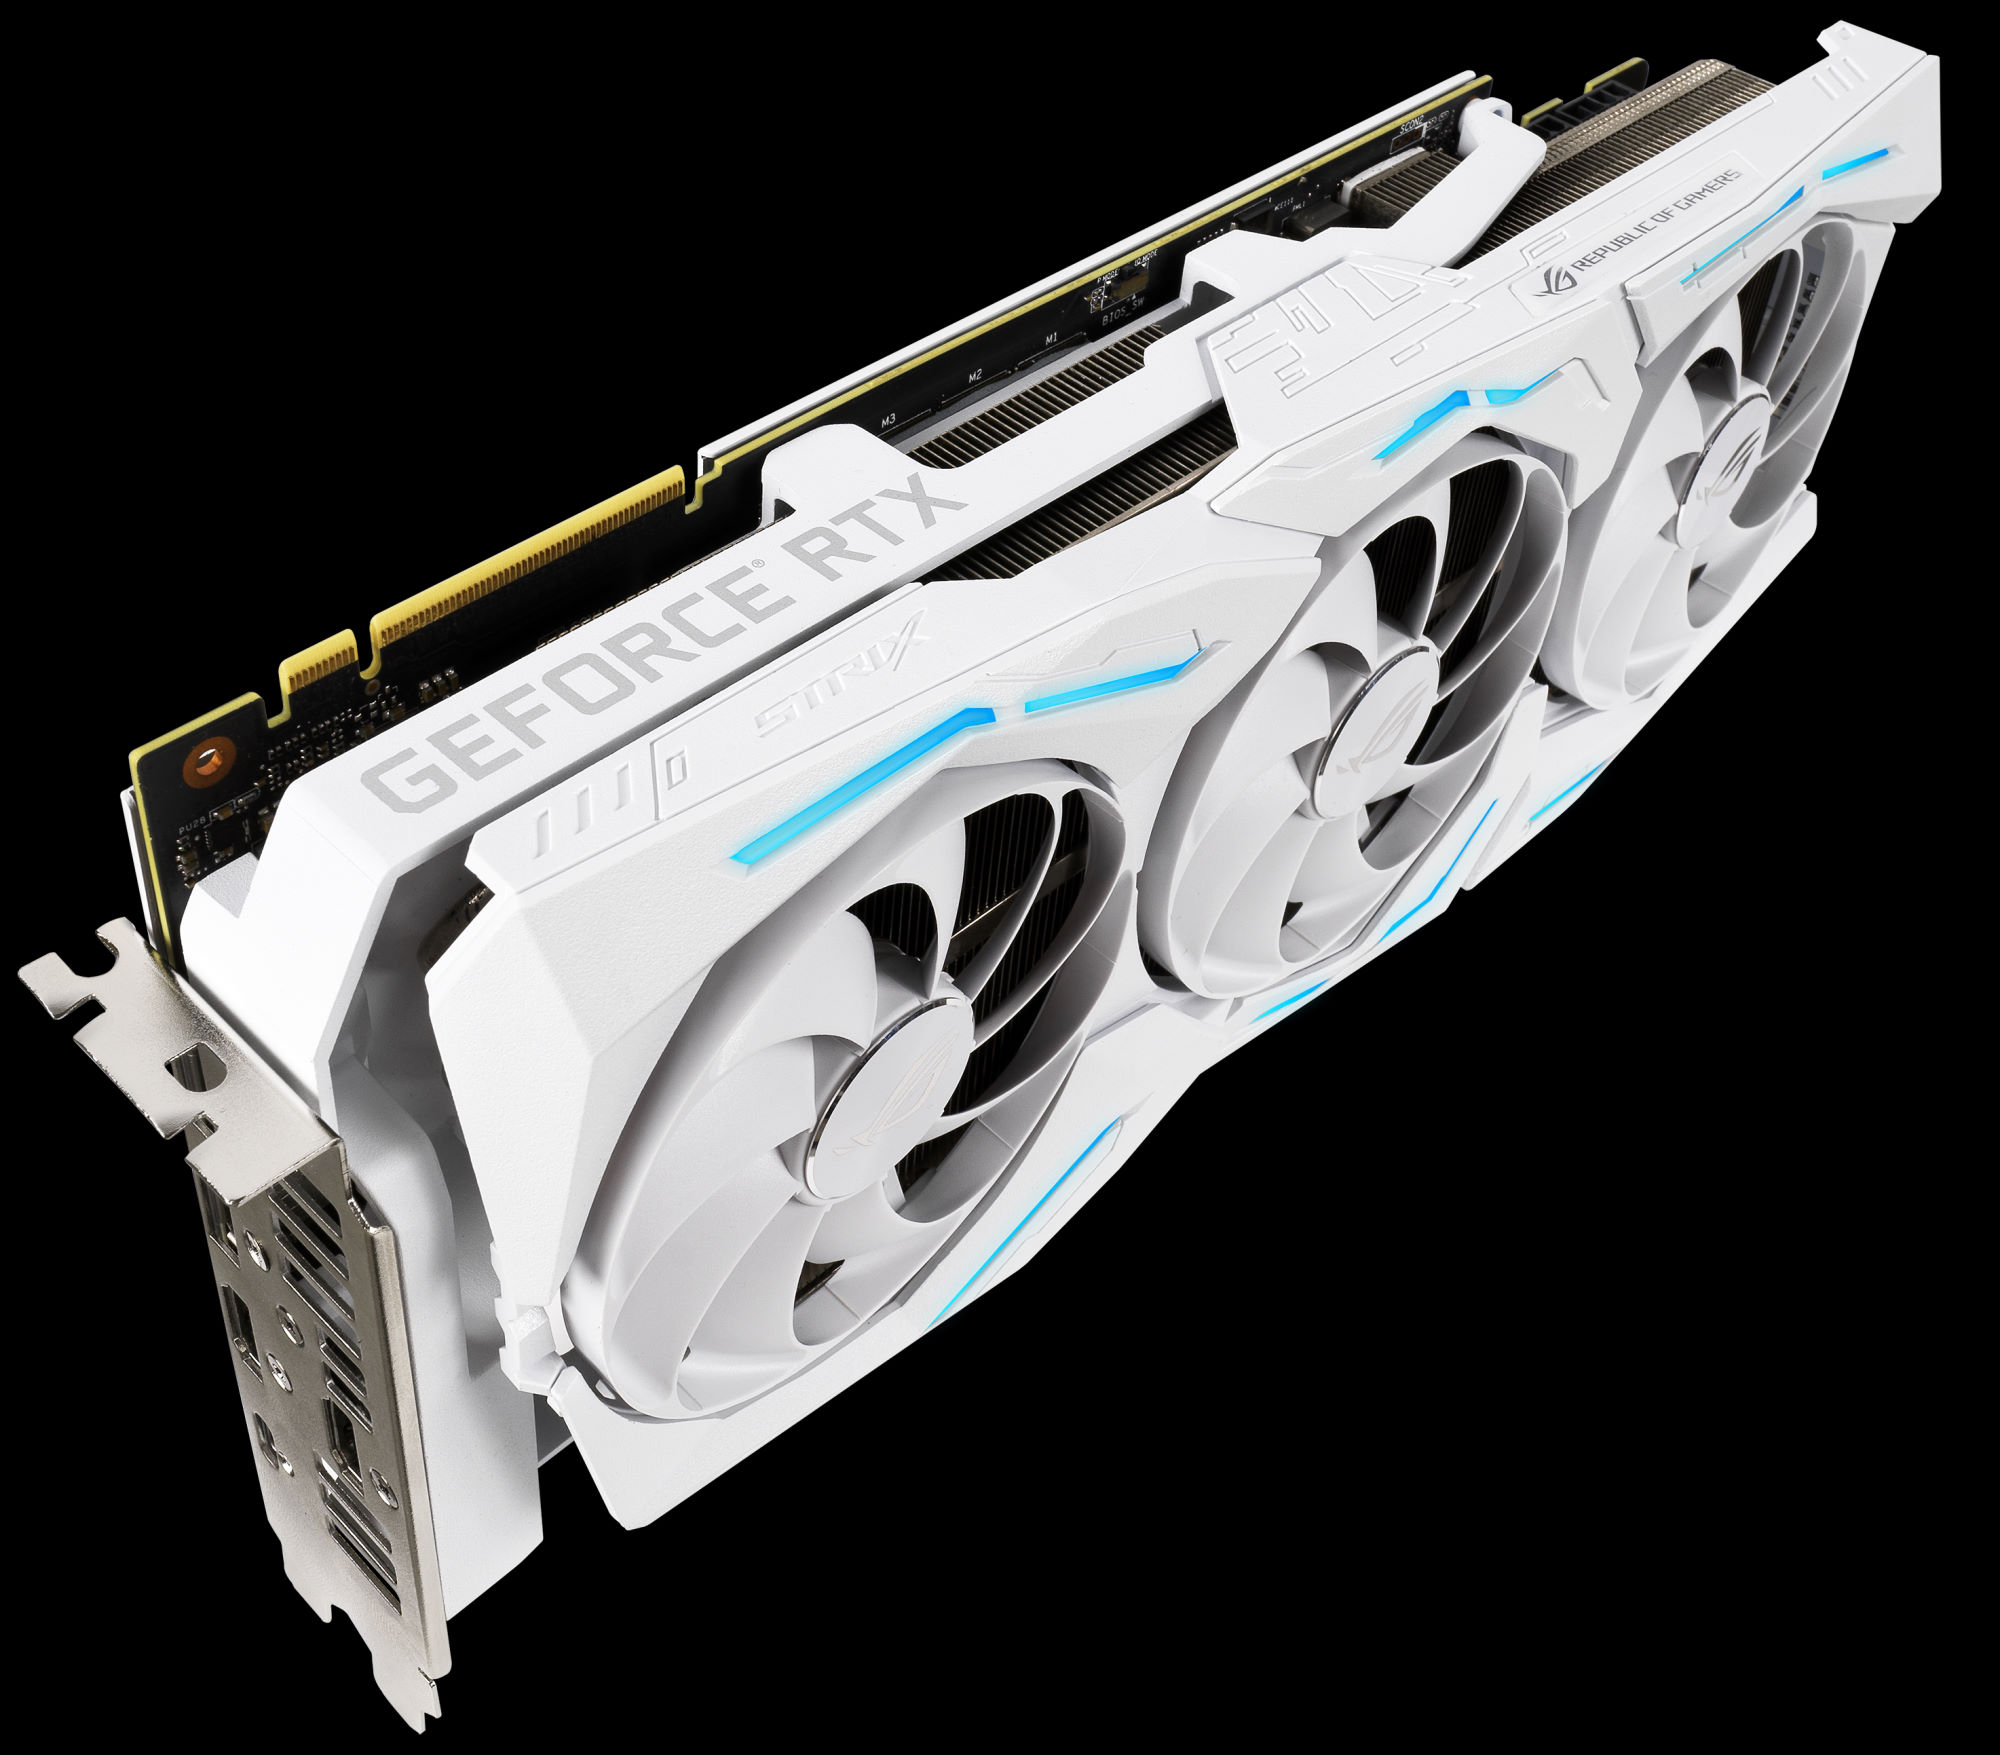 Fire and ice meet in the ROG Strix GeForce RTX 2080 Ti White Edition